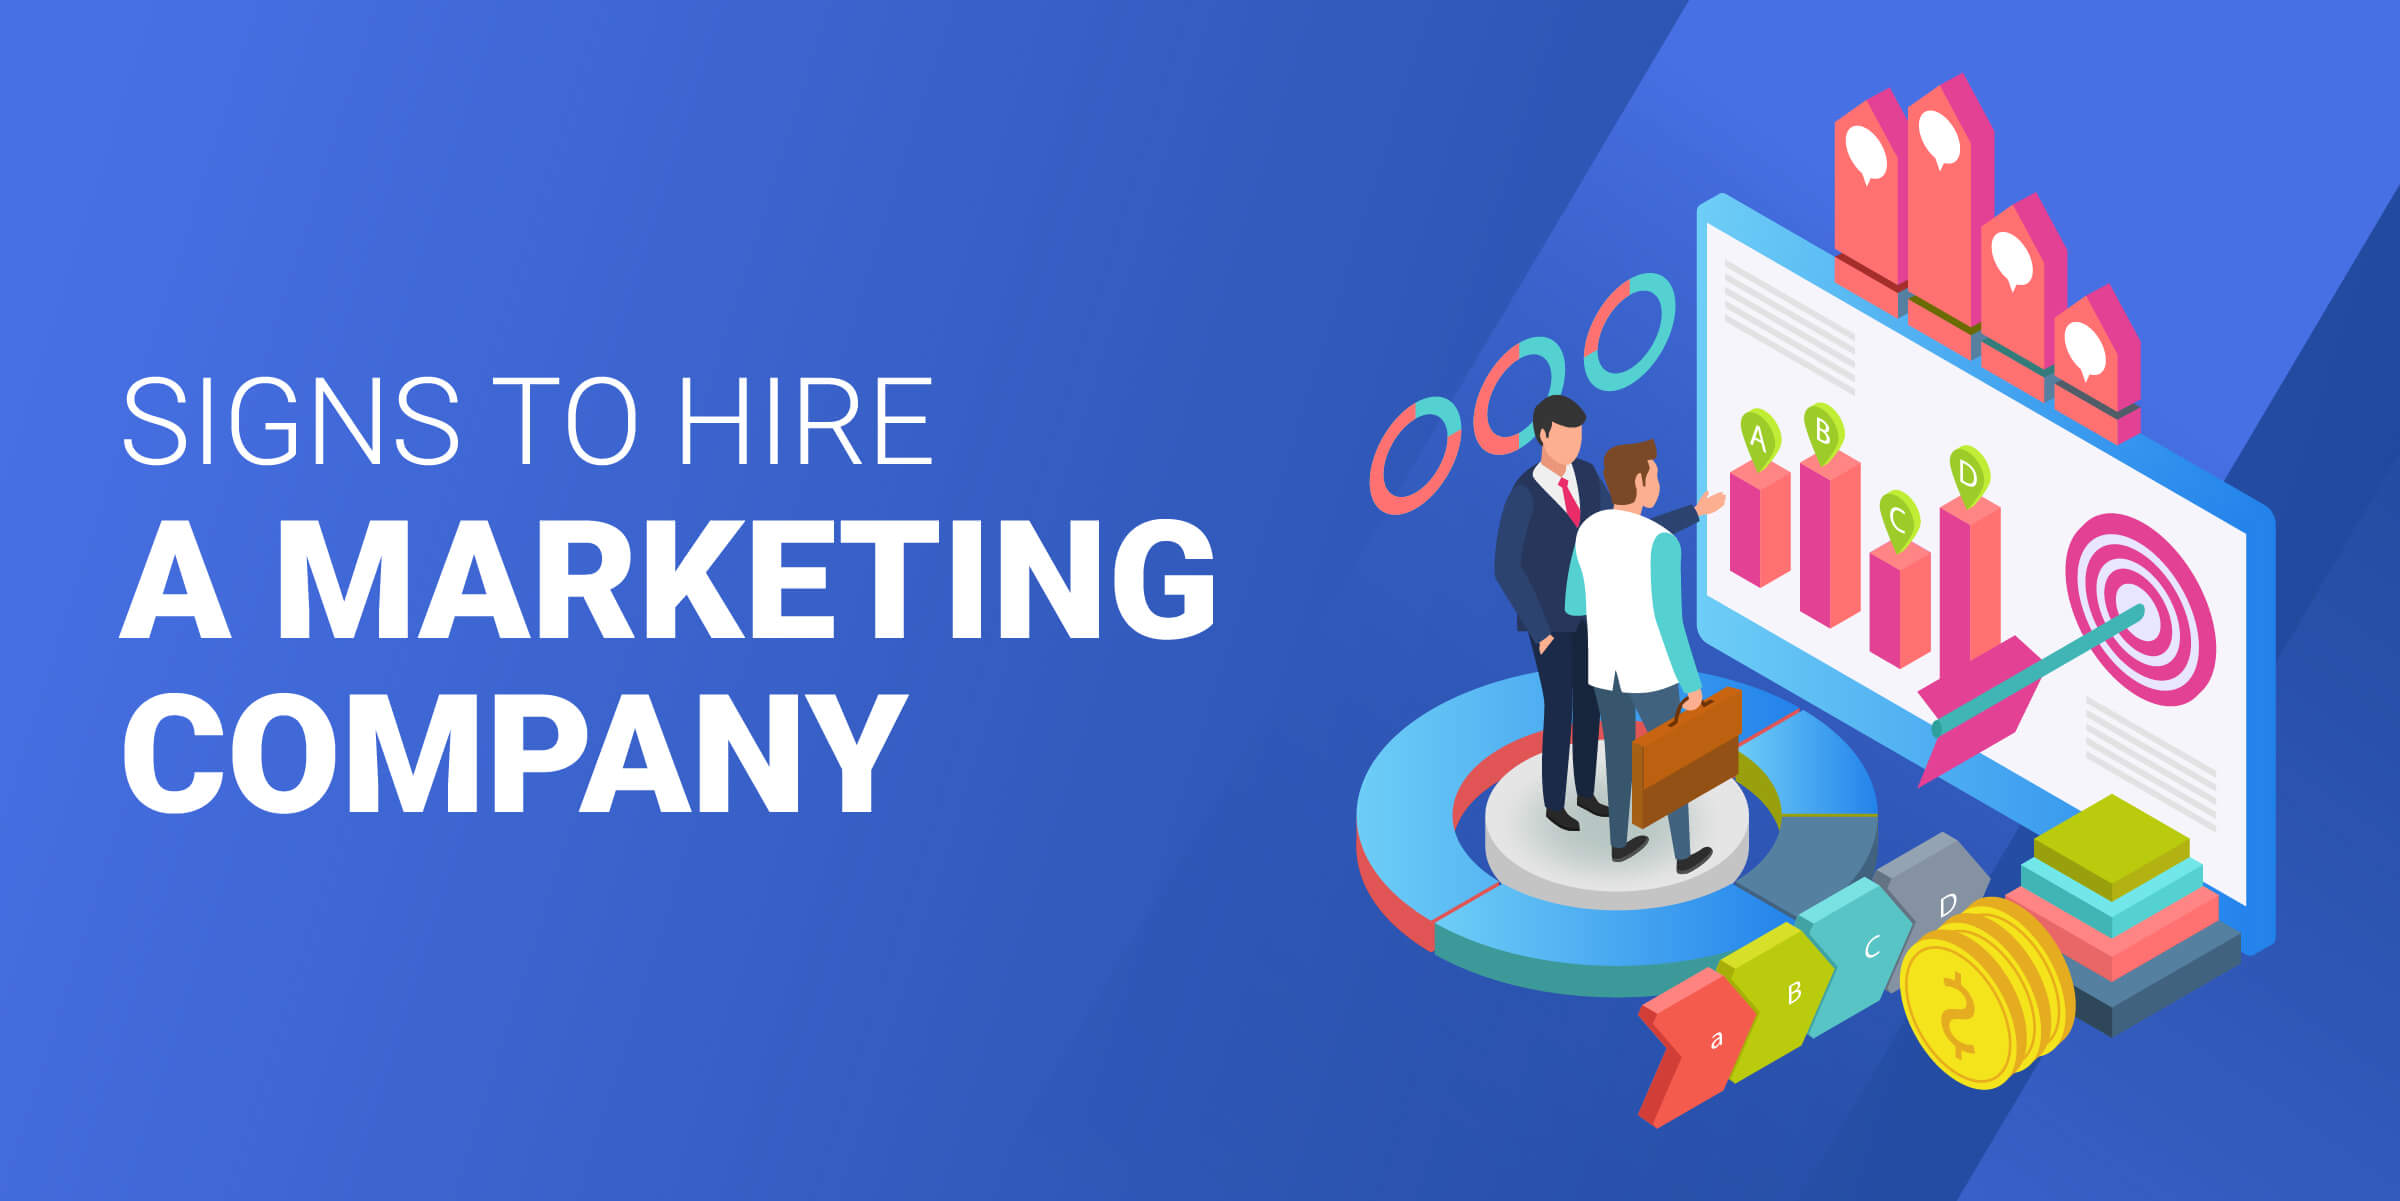 Signs to Hire Marketing Company